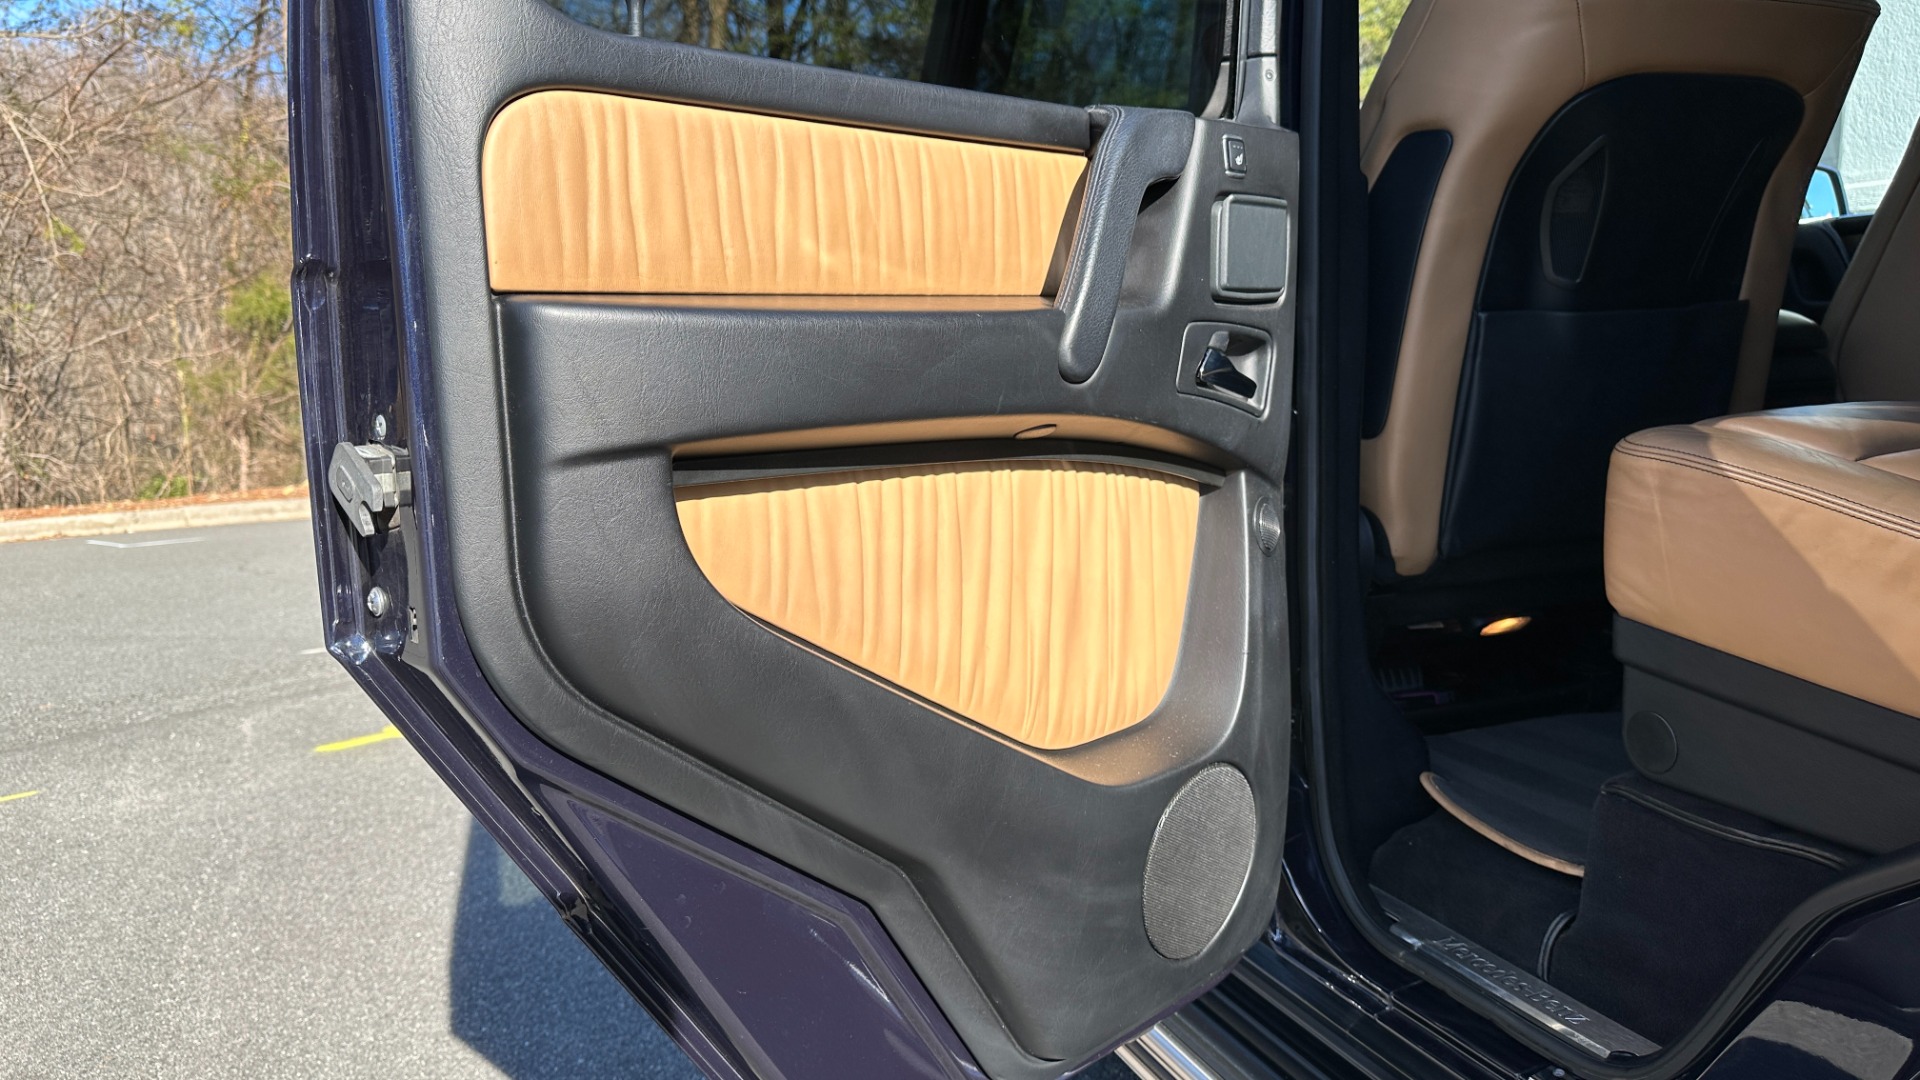 Used 2015 Mercedes-Benz G-Class G550 / DESIGNO NAPPA LEATHER / DESIGNO HEADLINER / HEATED STEERING / NAV /  for sale Sold at Formula Imports in Charlotte NC 28227 21